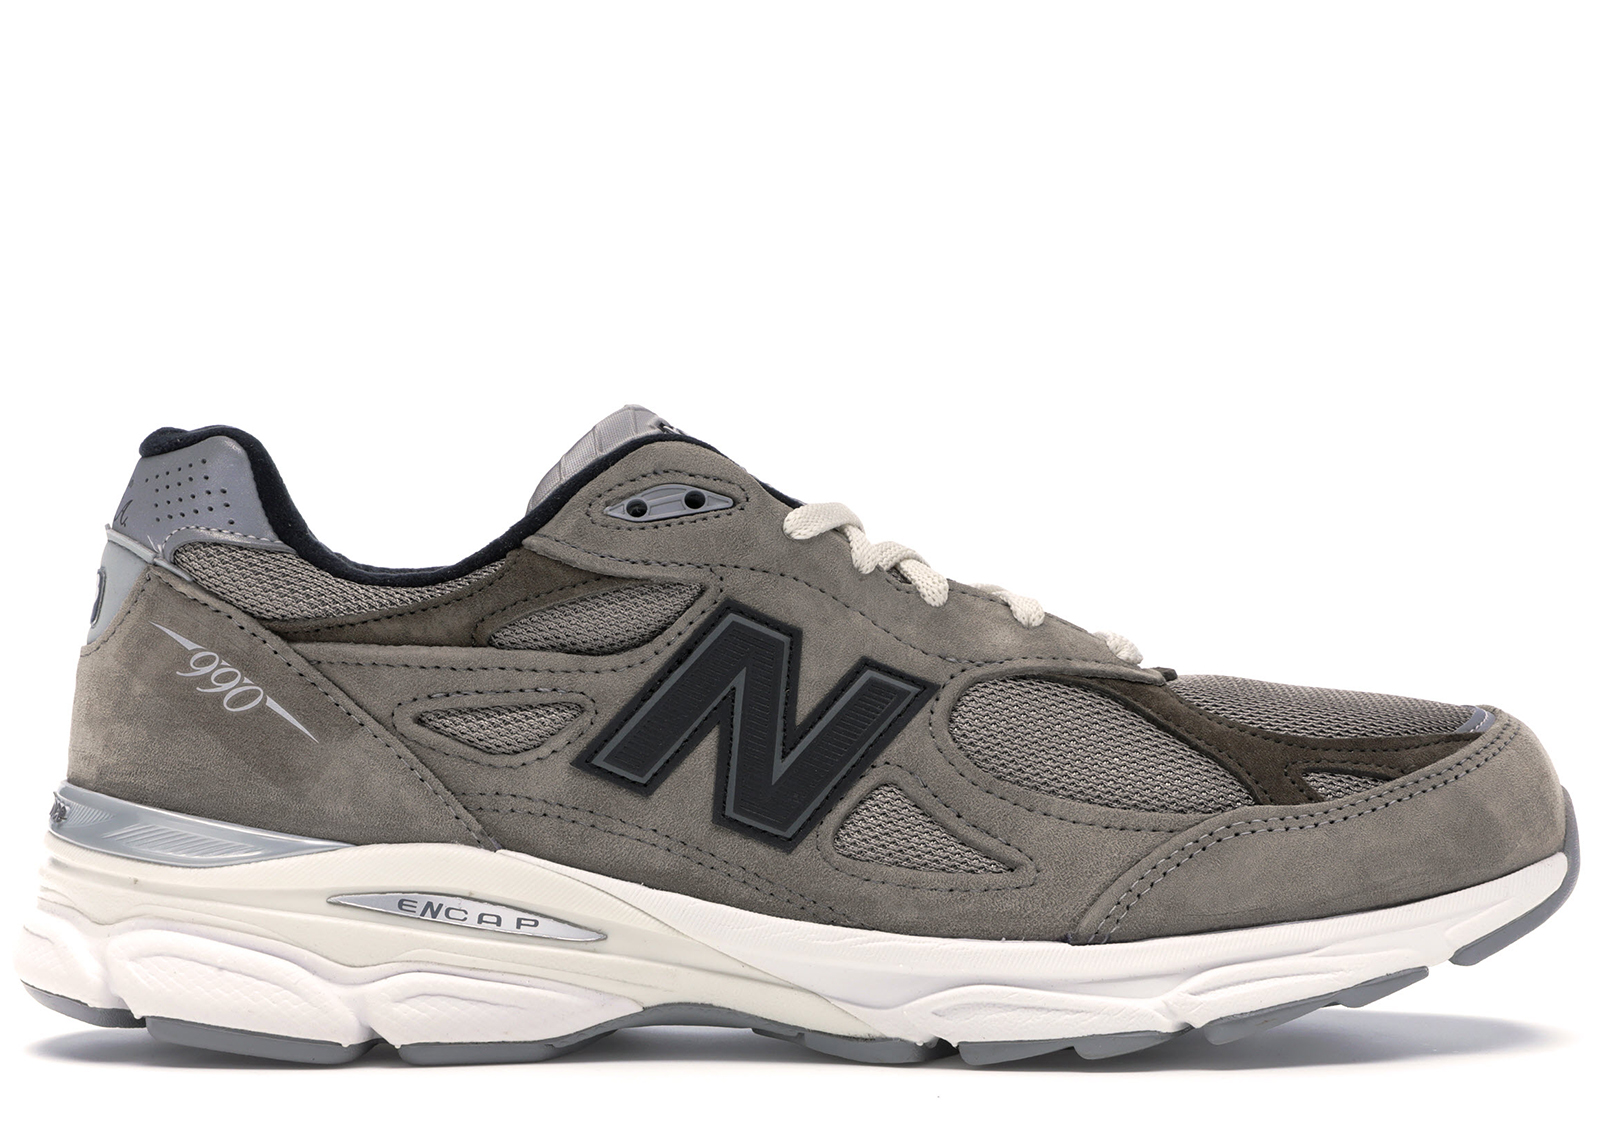 Buy New Balance 990v3 Shoes & Deadstock Sneakers